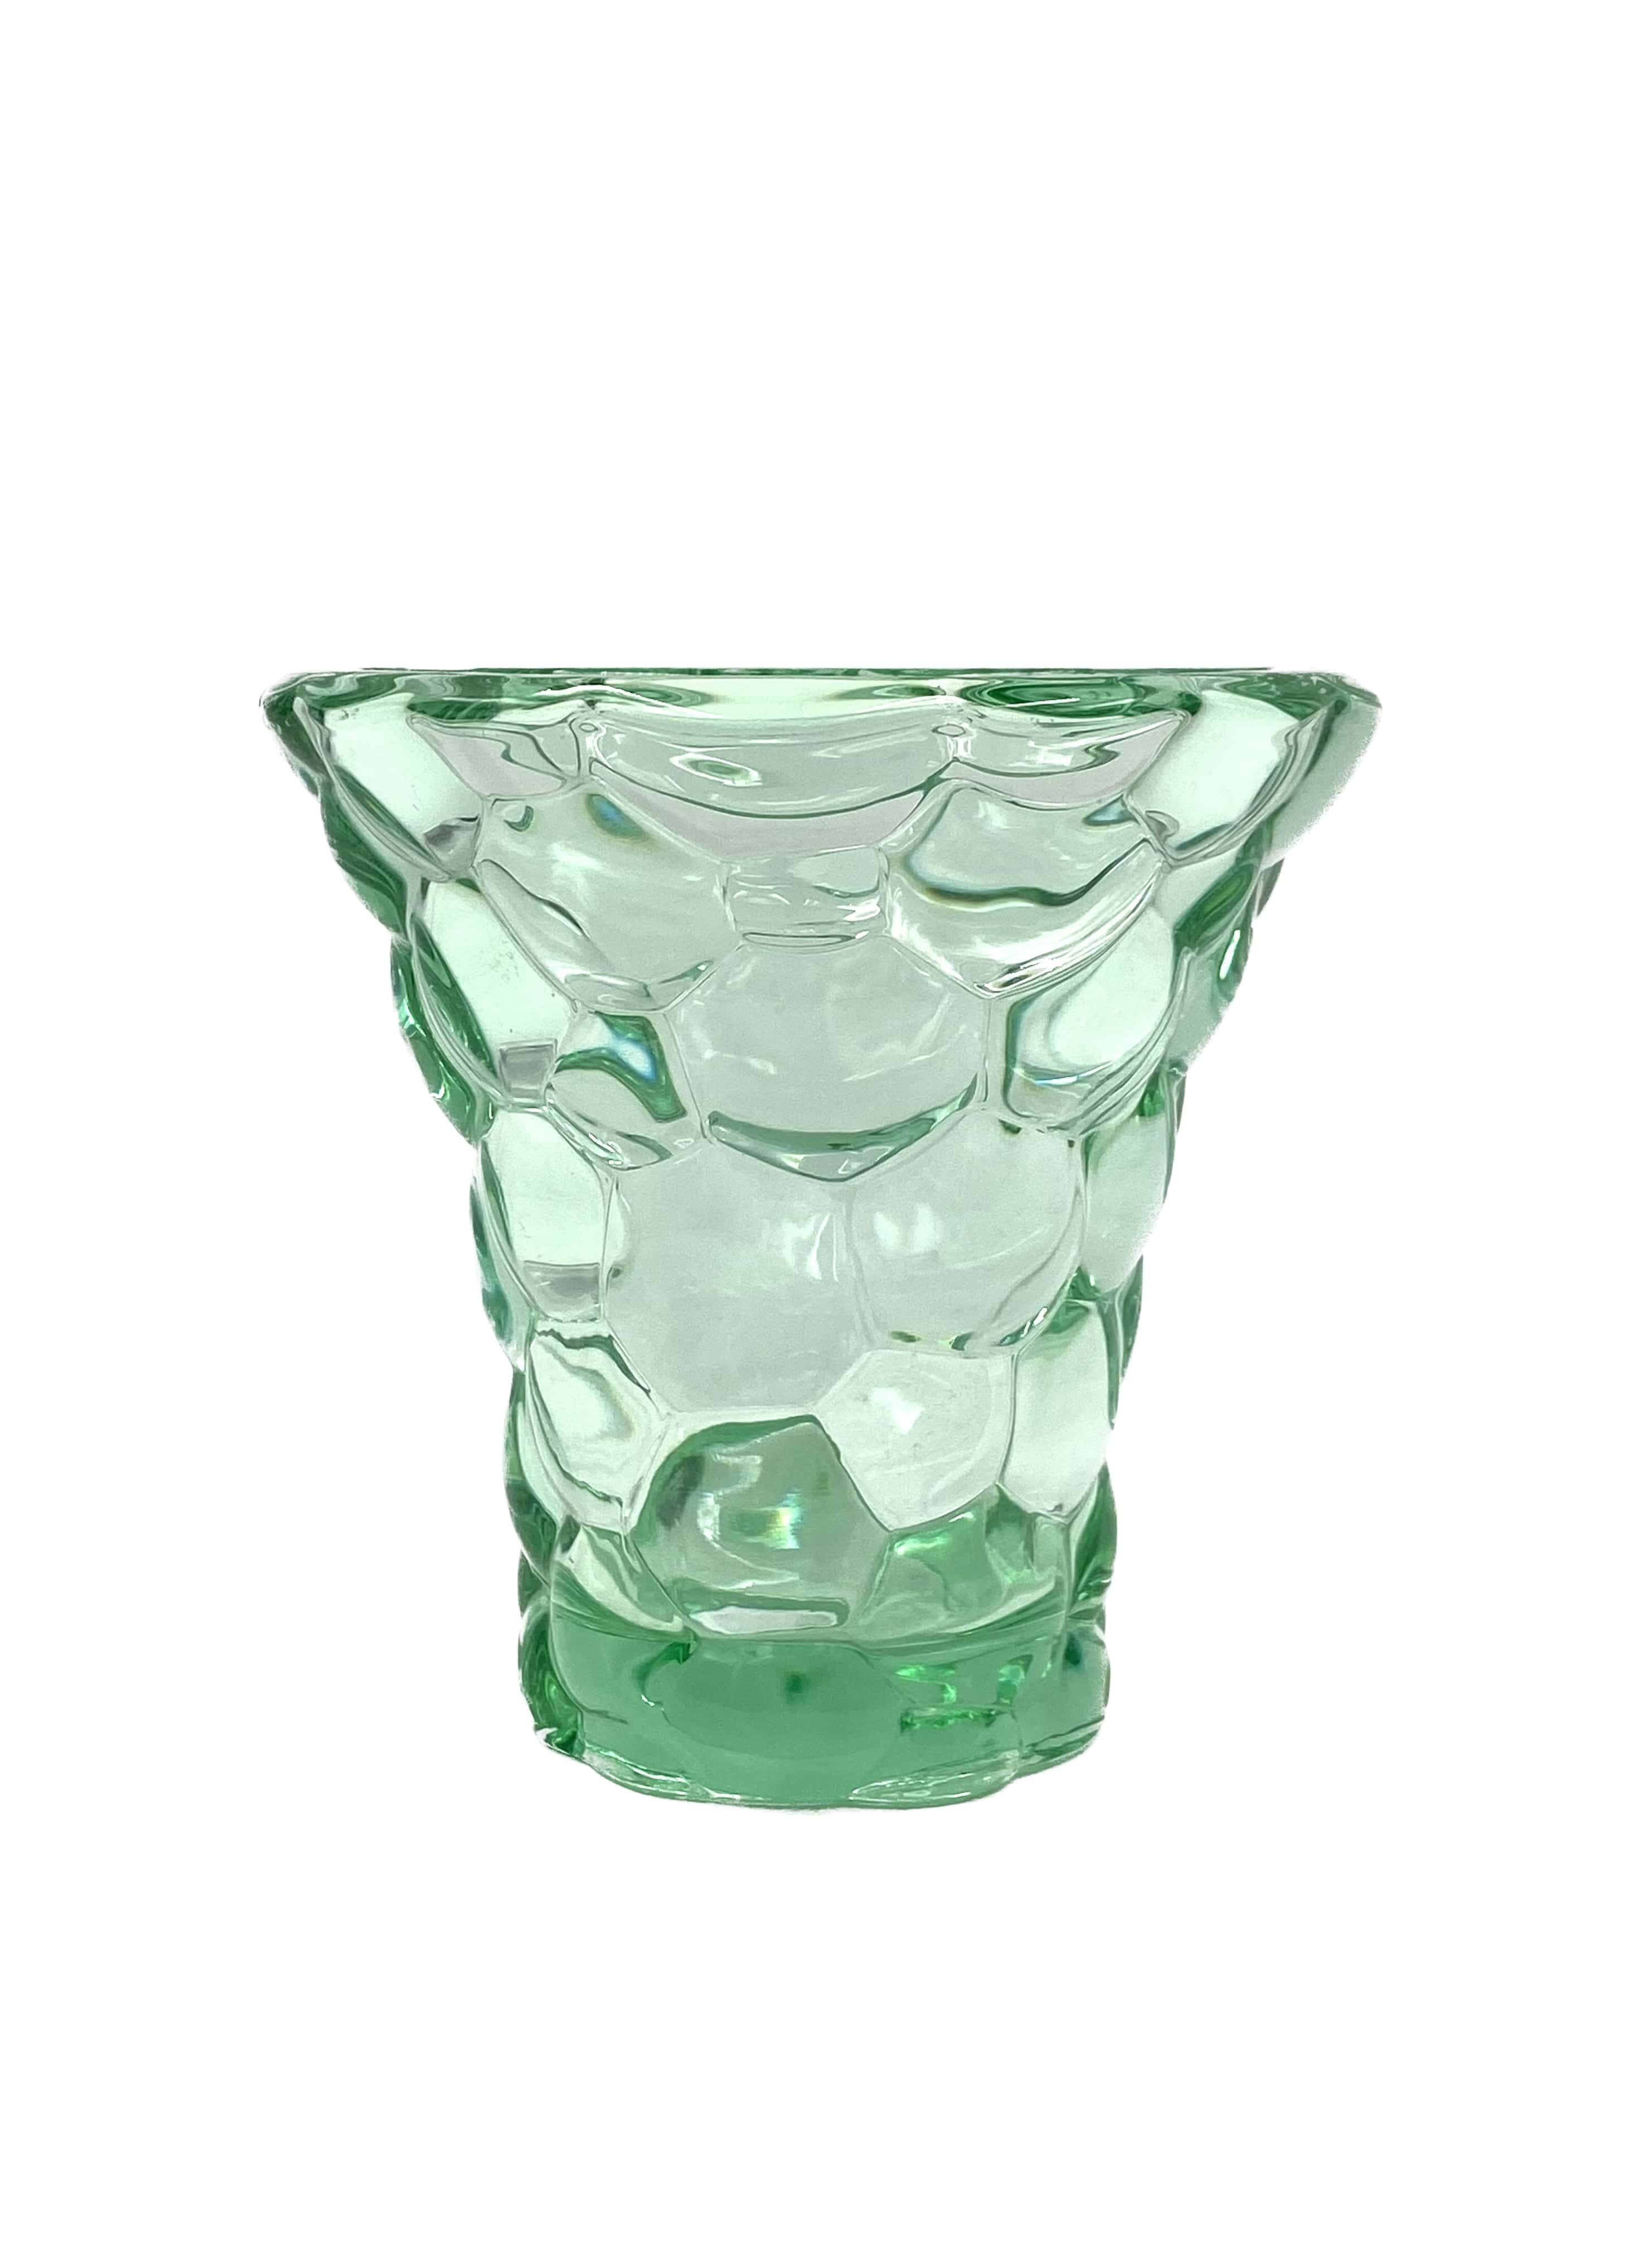 Water green molded glass vase, 